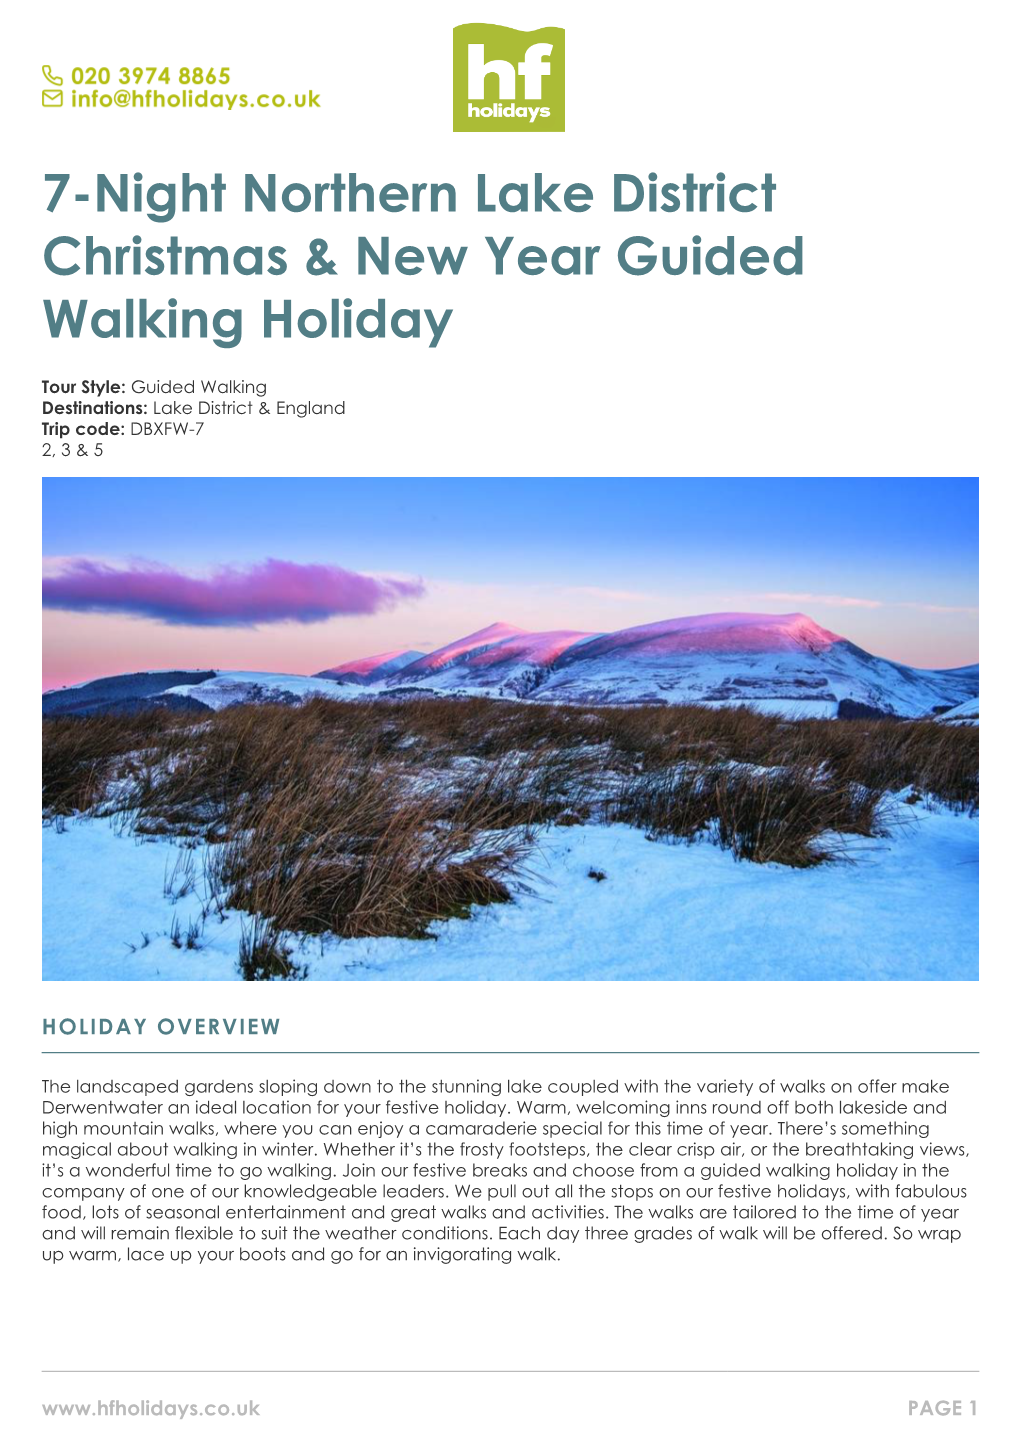 7-Night Northern Lake District Christmas & New Year Guided